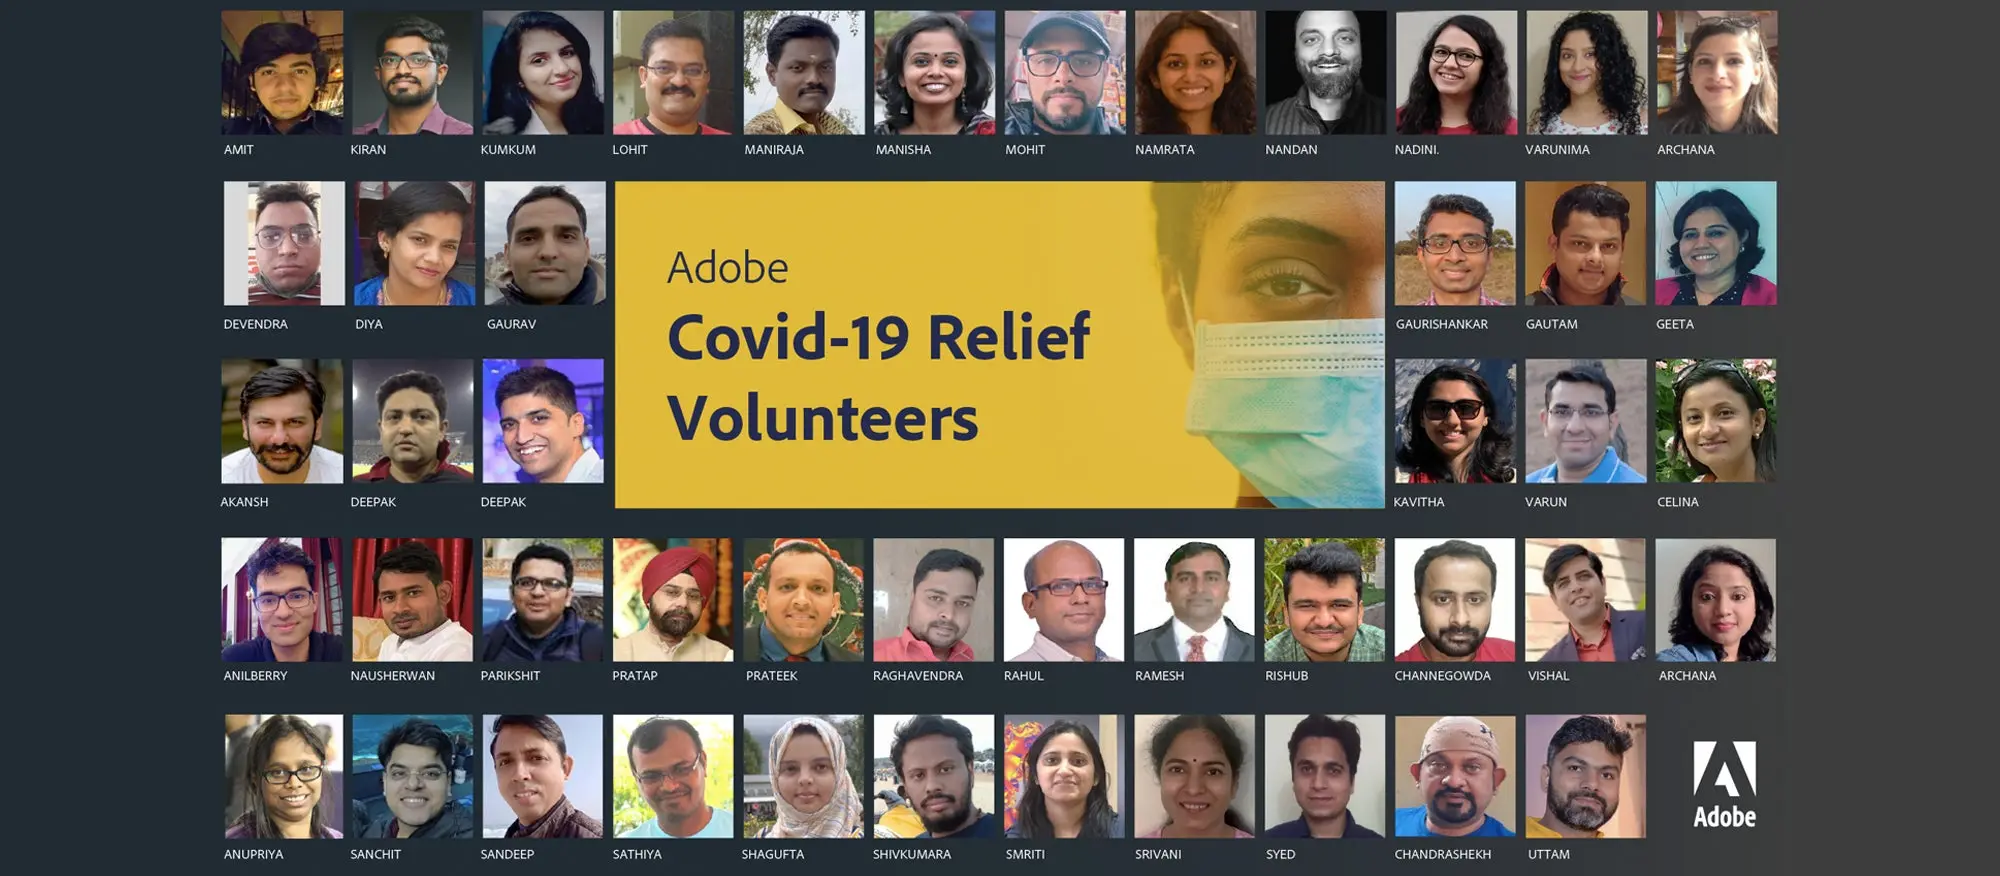 A look at some of our Adobe Covid-19 Relief Volunteers. 